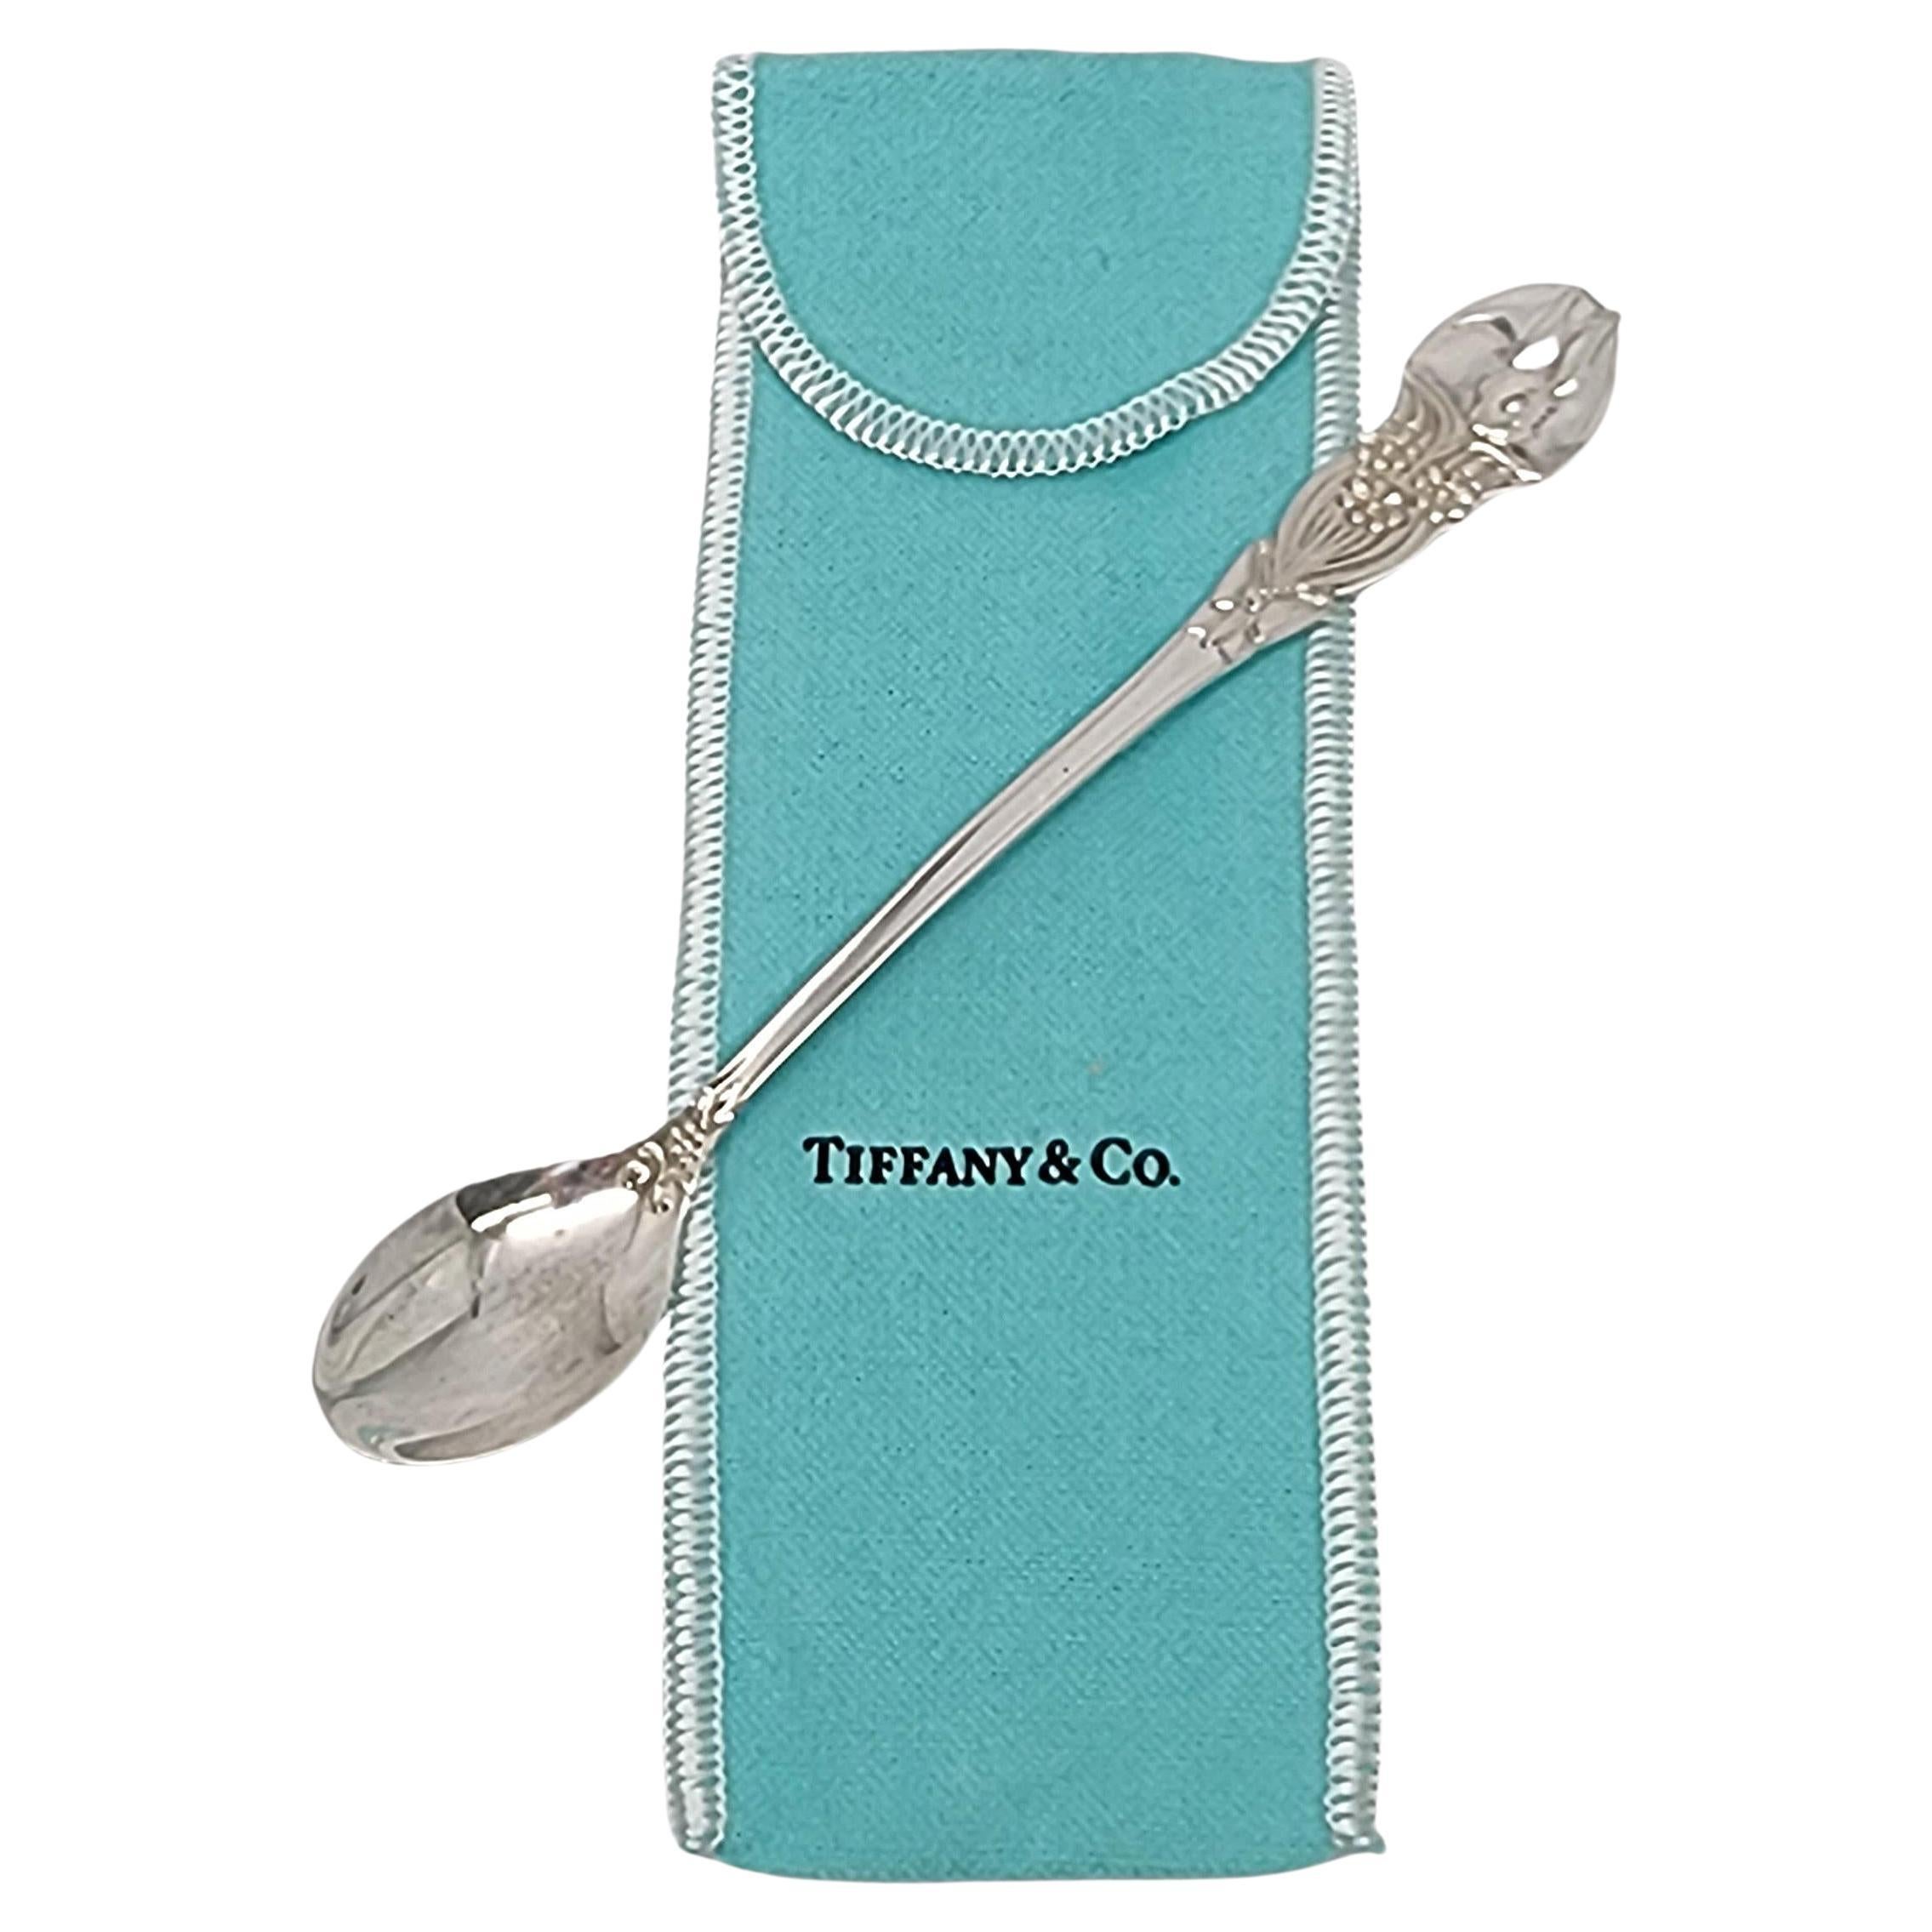 Tiffany & Co Sterling Silver Meadows Bunny Rabbit Baby Spoon with Pouch #16858